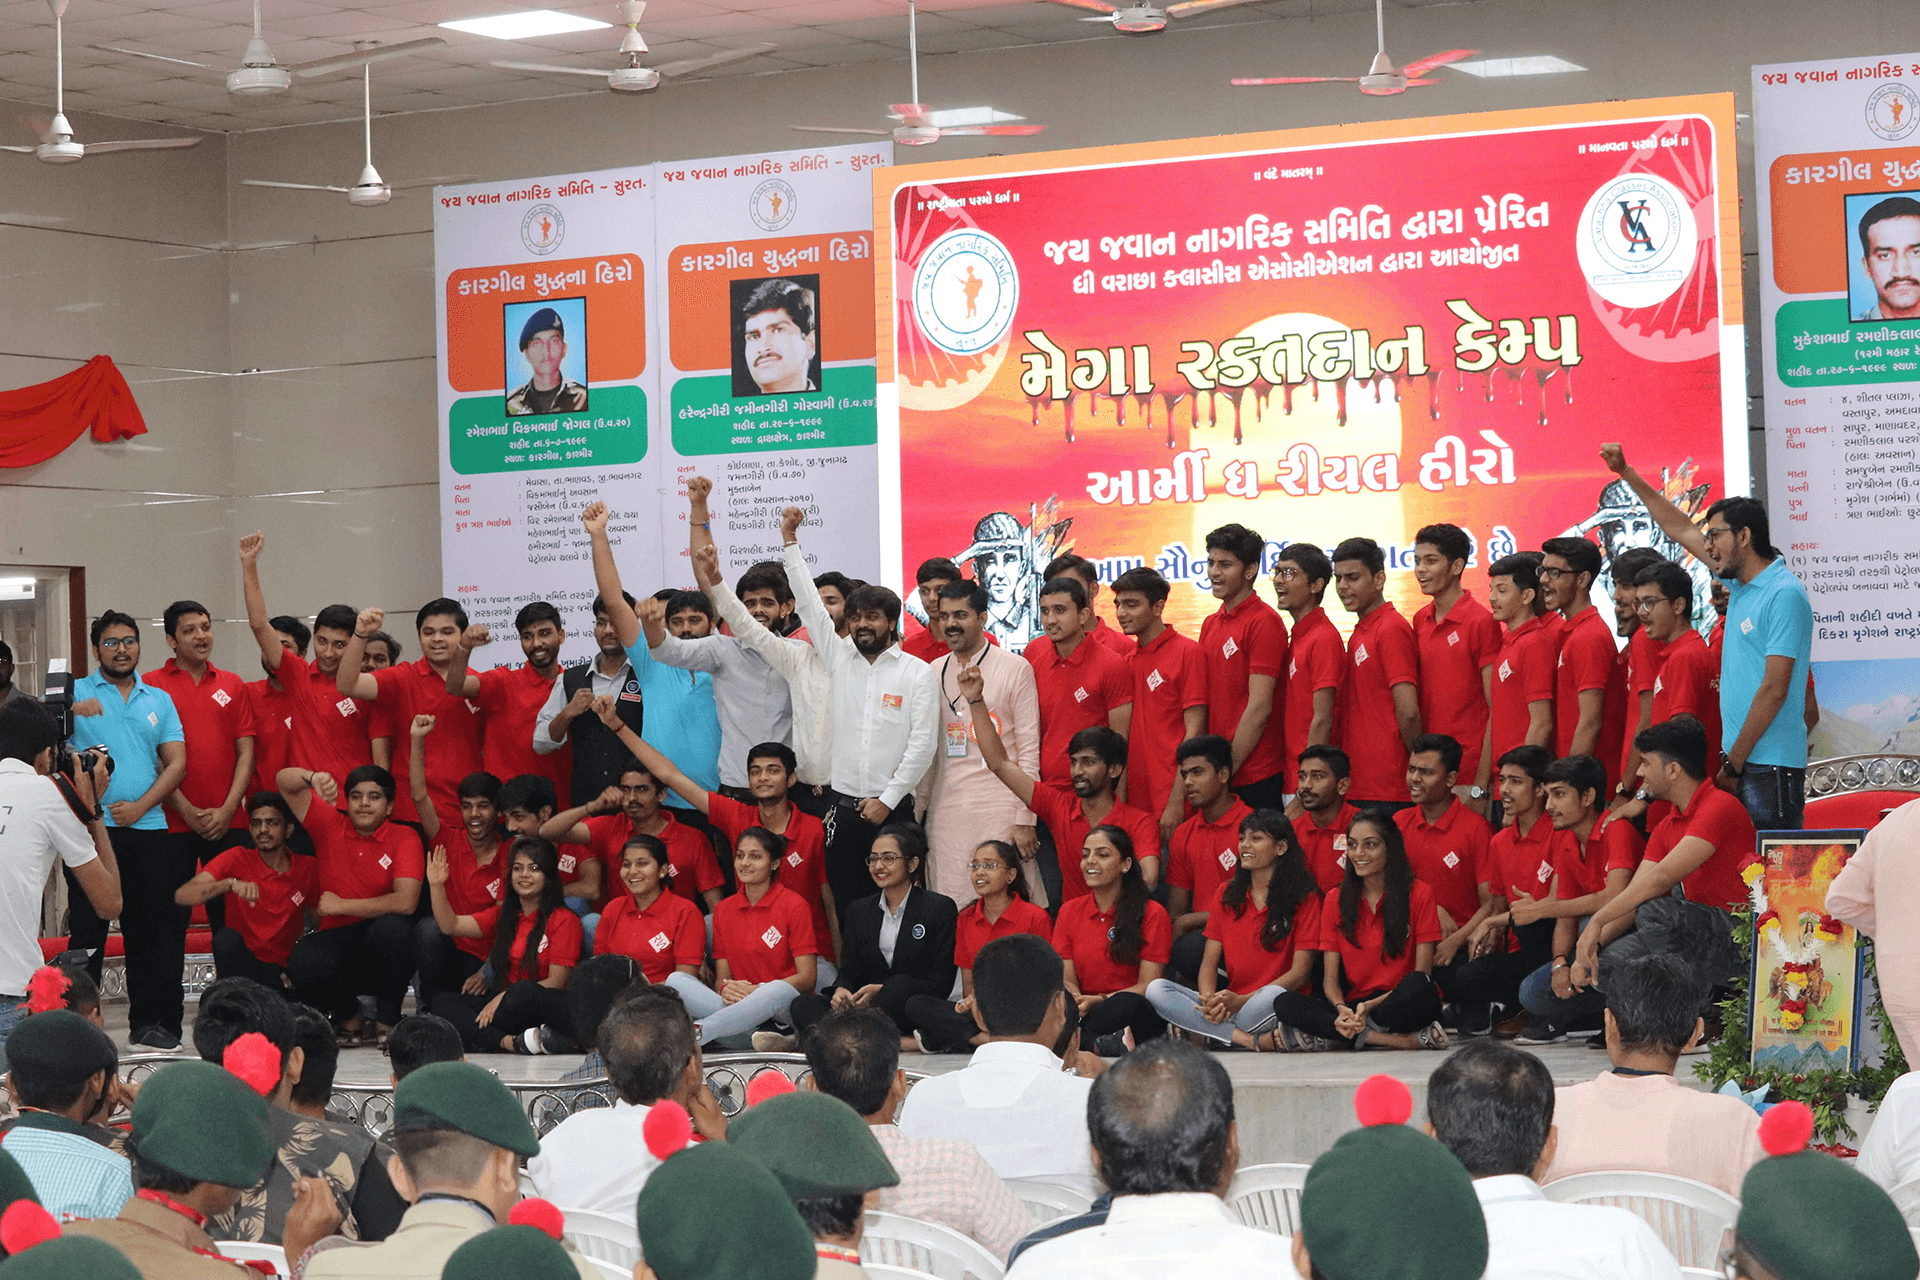 Blood Donation Camp organized by Red & White Multimedia